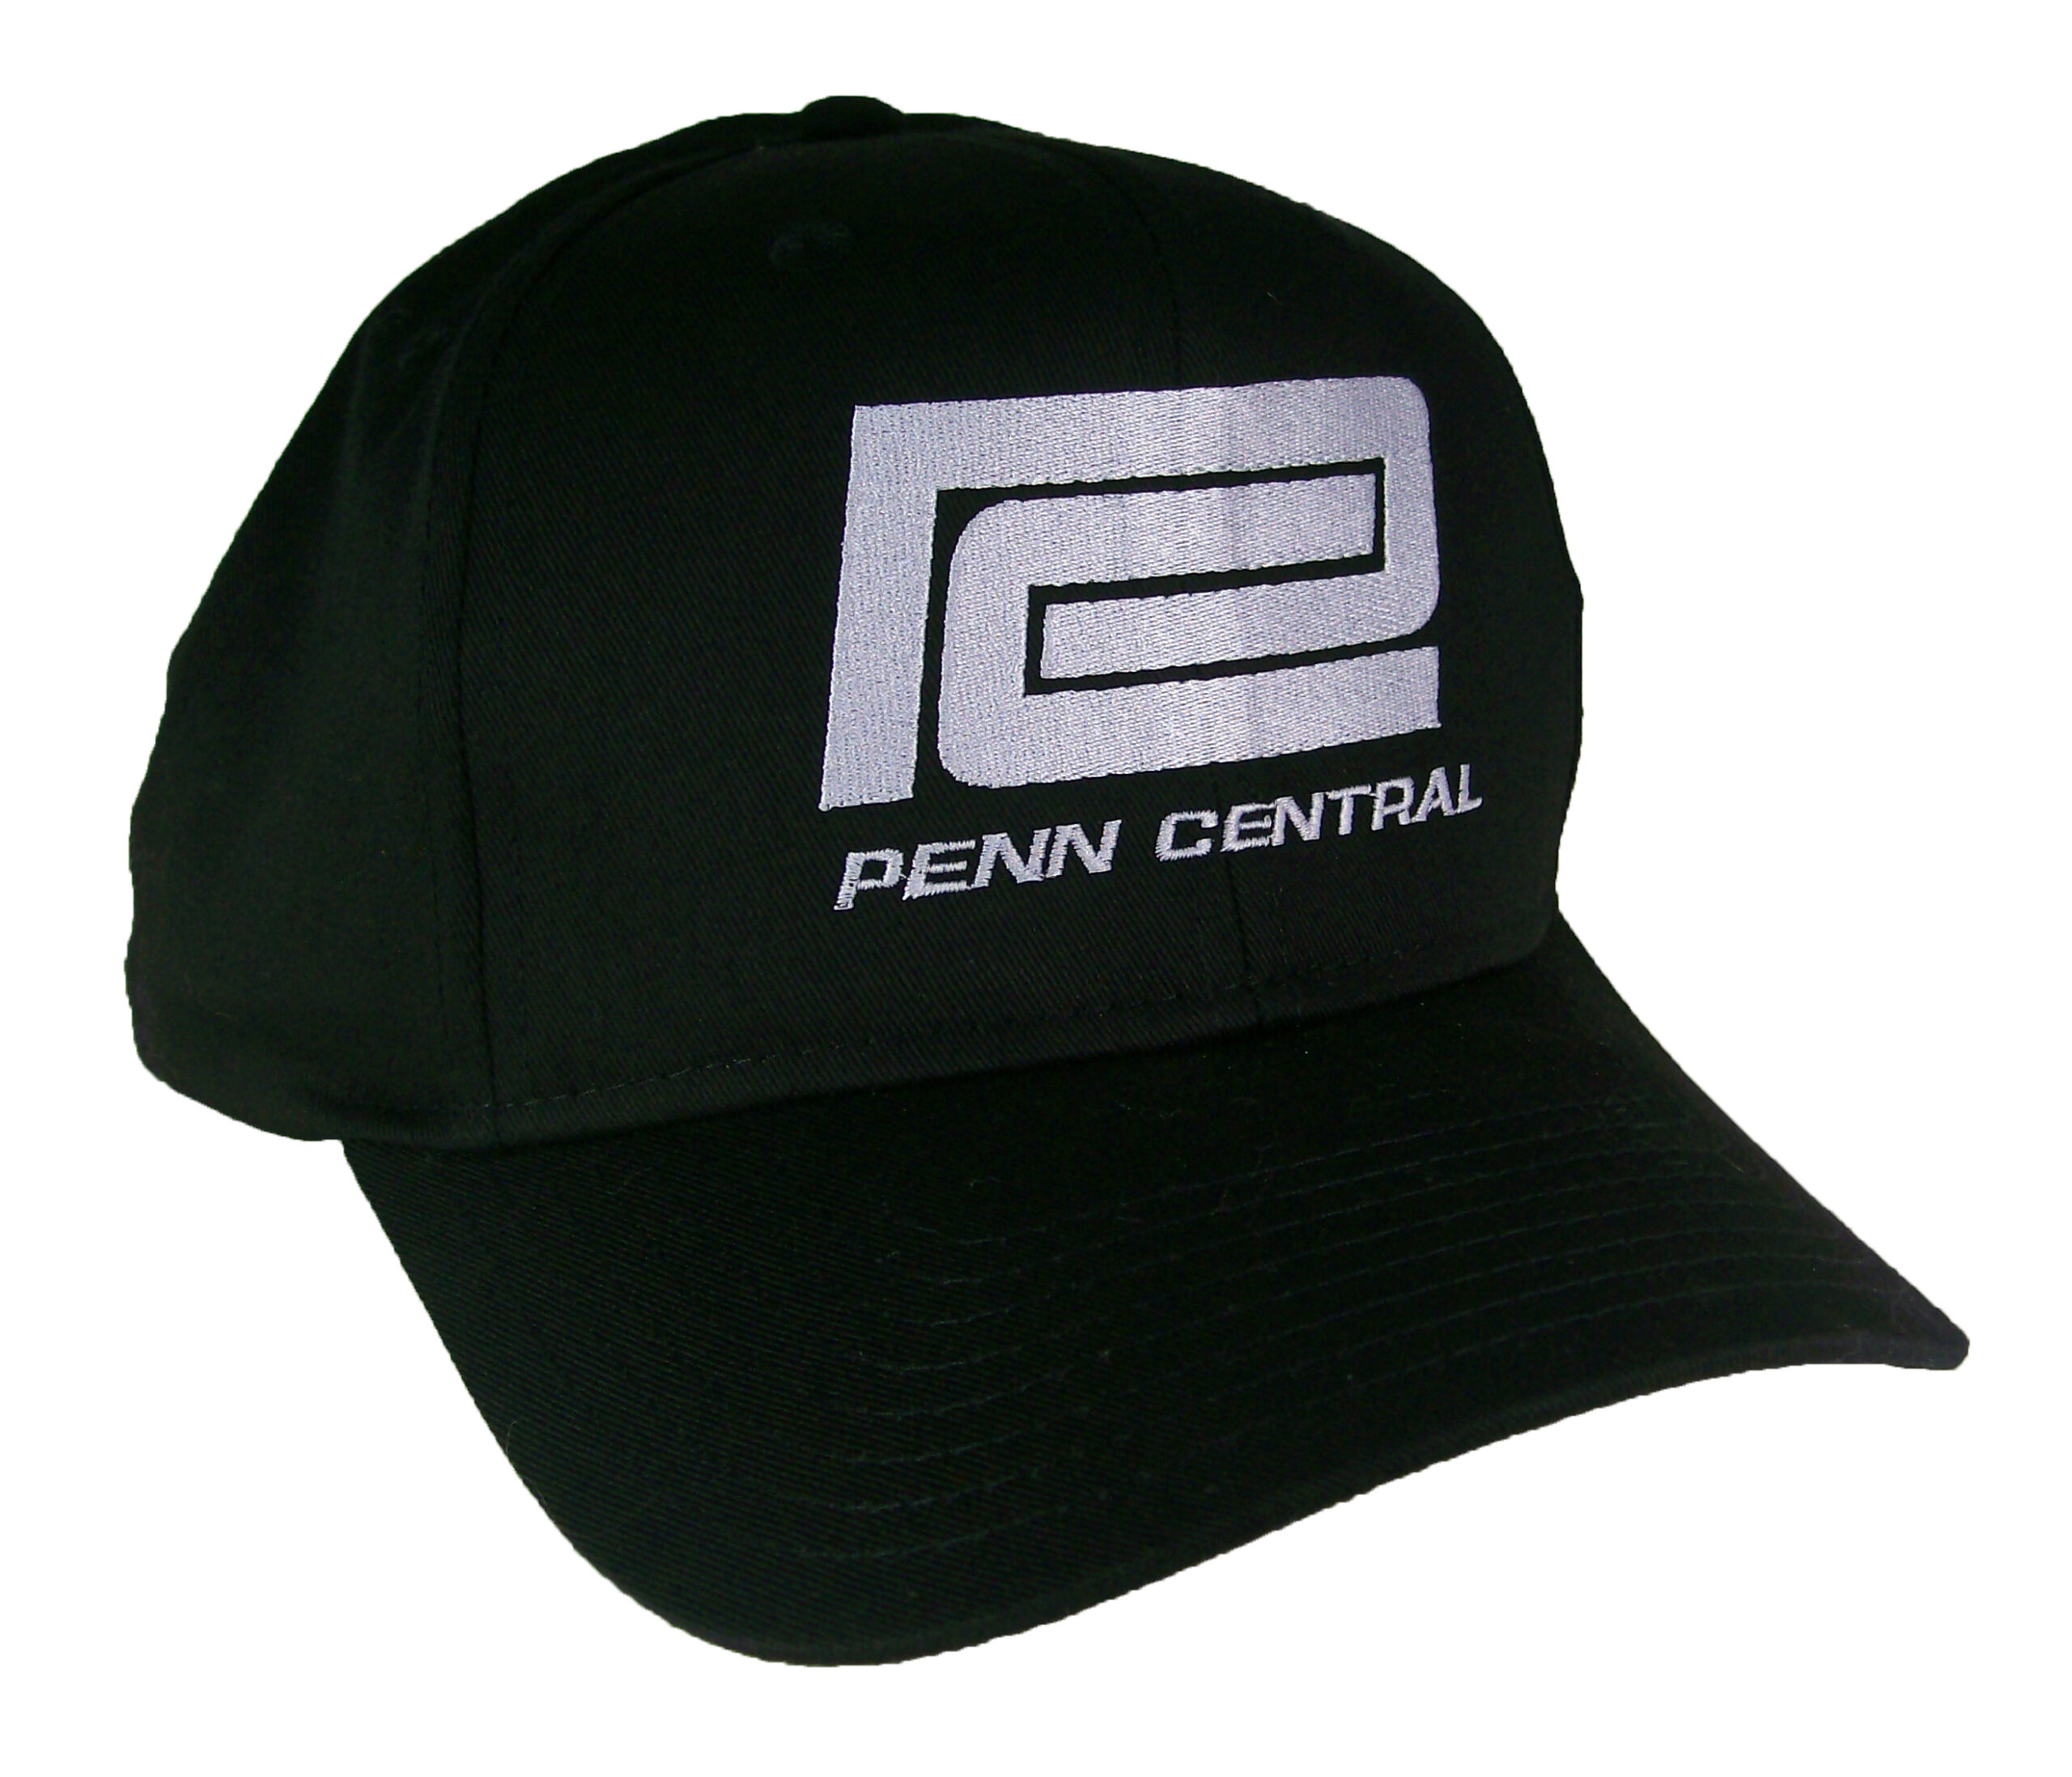 Penn Central Railroad Embroidered Railway Cap Hat #40-1001 CHOICE OF ...